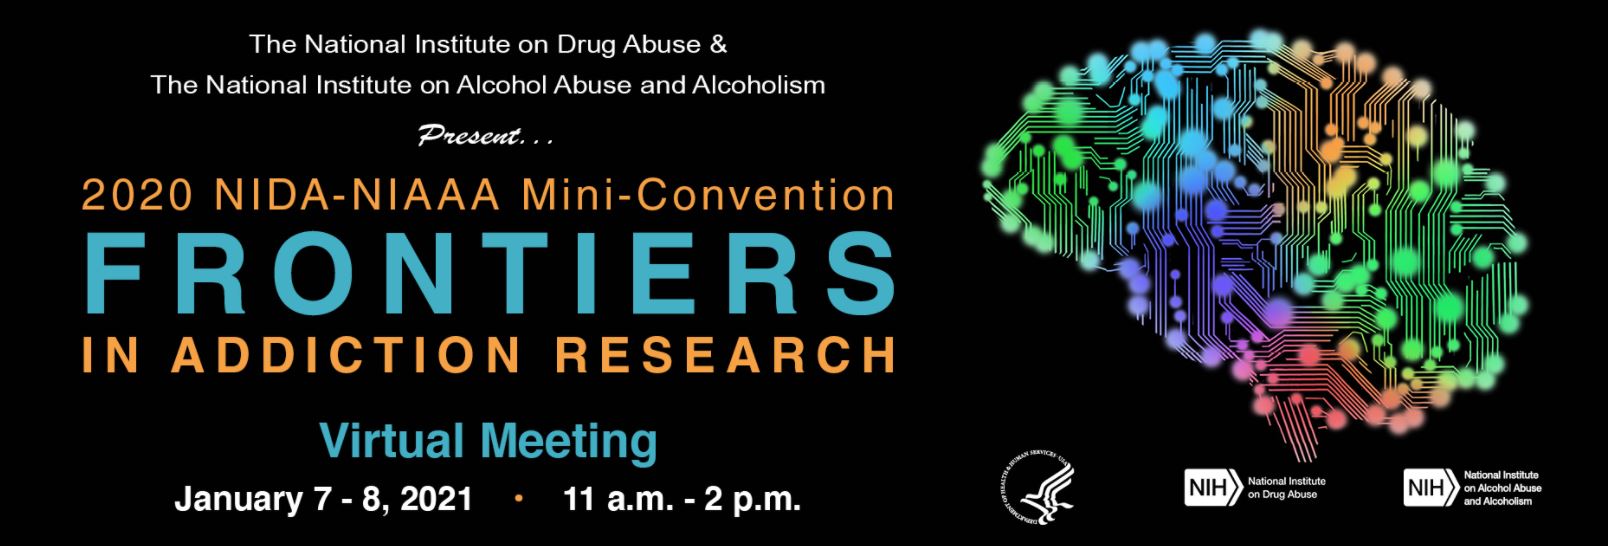 Frontiers in Addiction Research Mini Convention 2020